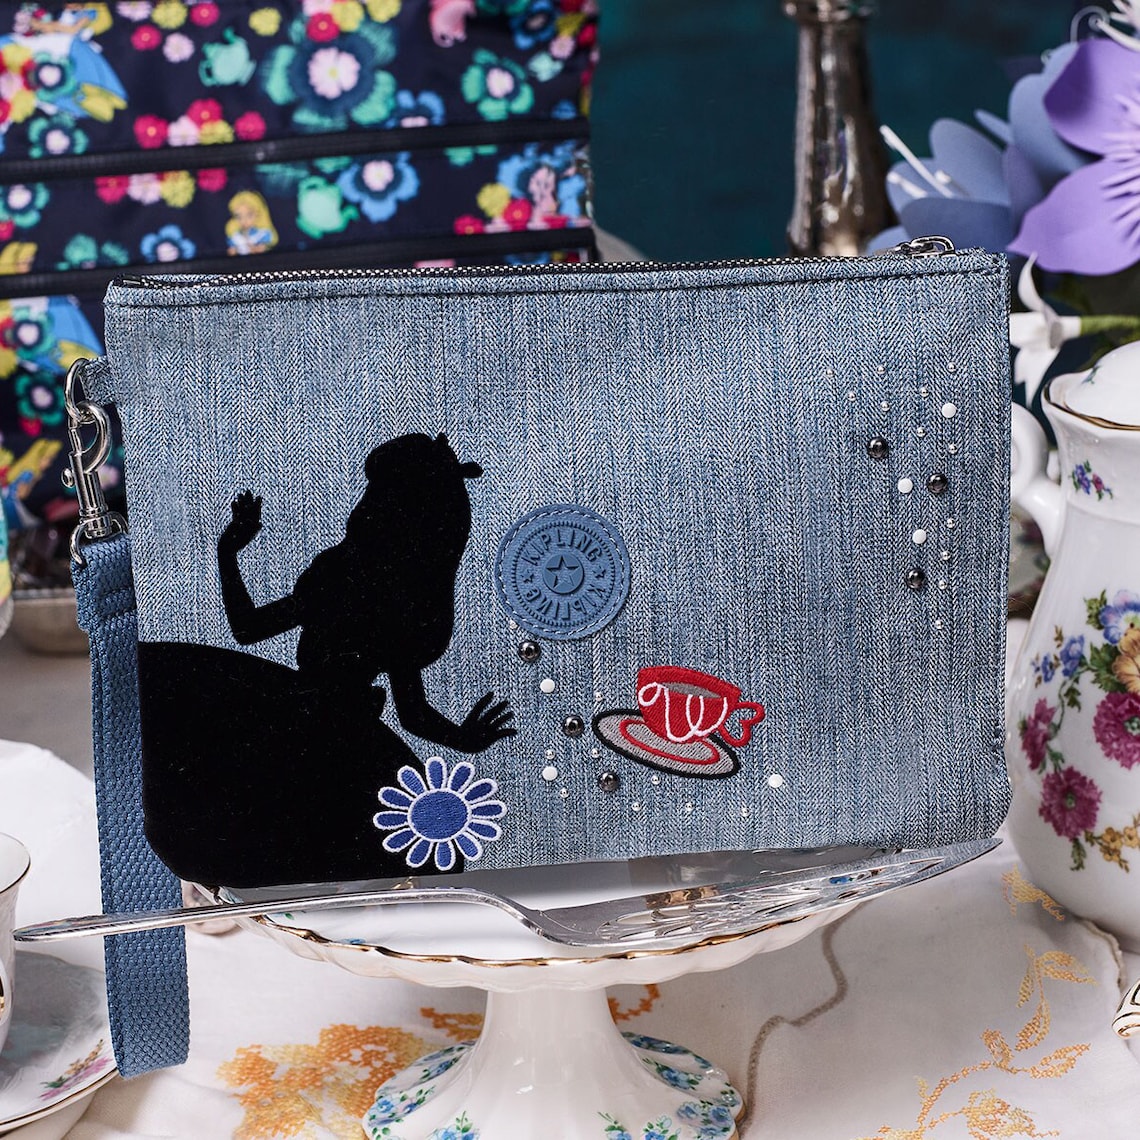 A Kipling denim wristlet pouch featuring a silhouette of Alice in Wonderland and an embroidery flower and tea cup on display among a tea serving set